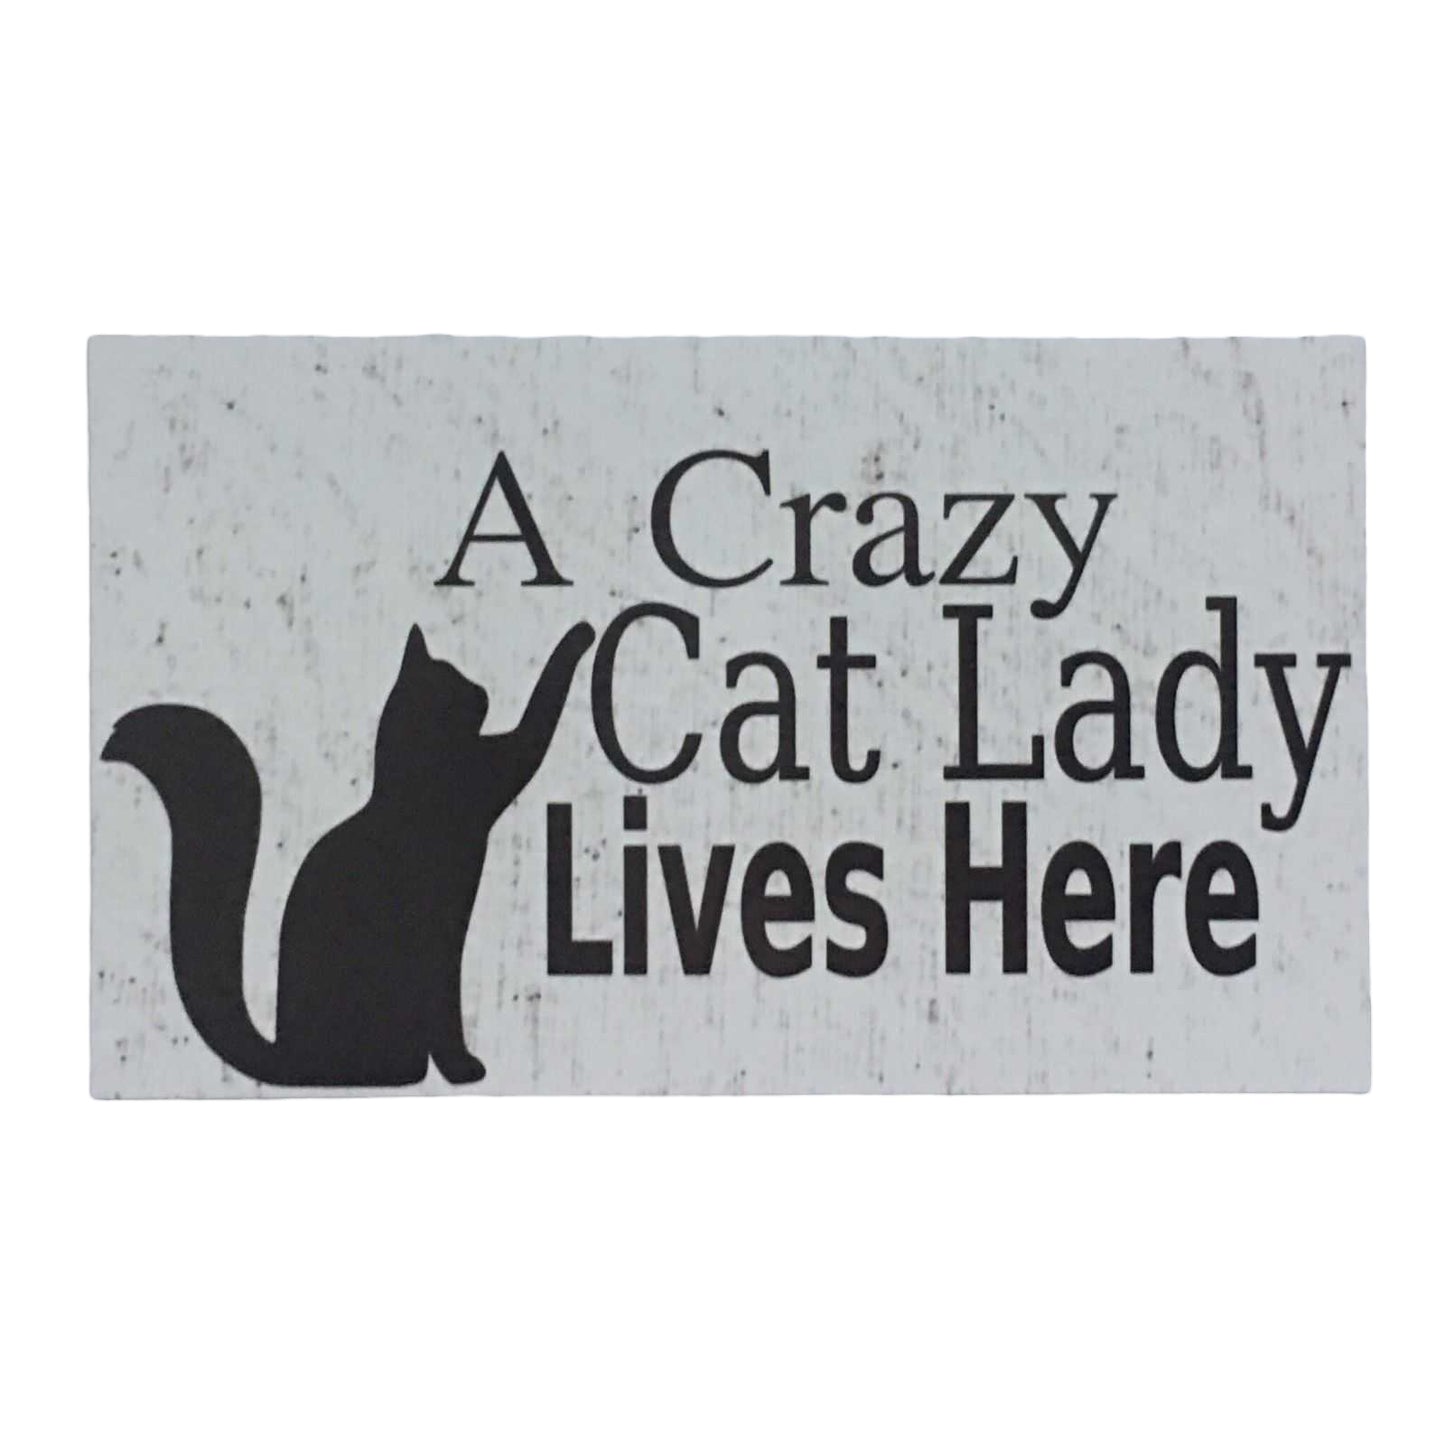 Crazy Cat Lady Lives Here Sign - The Renmy Store Homewares & Gifts 